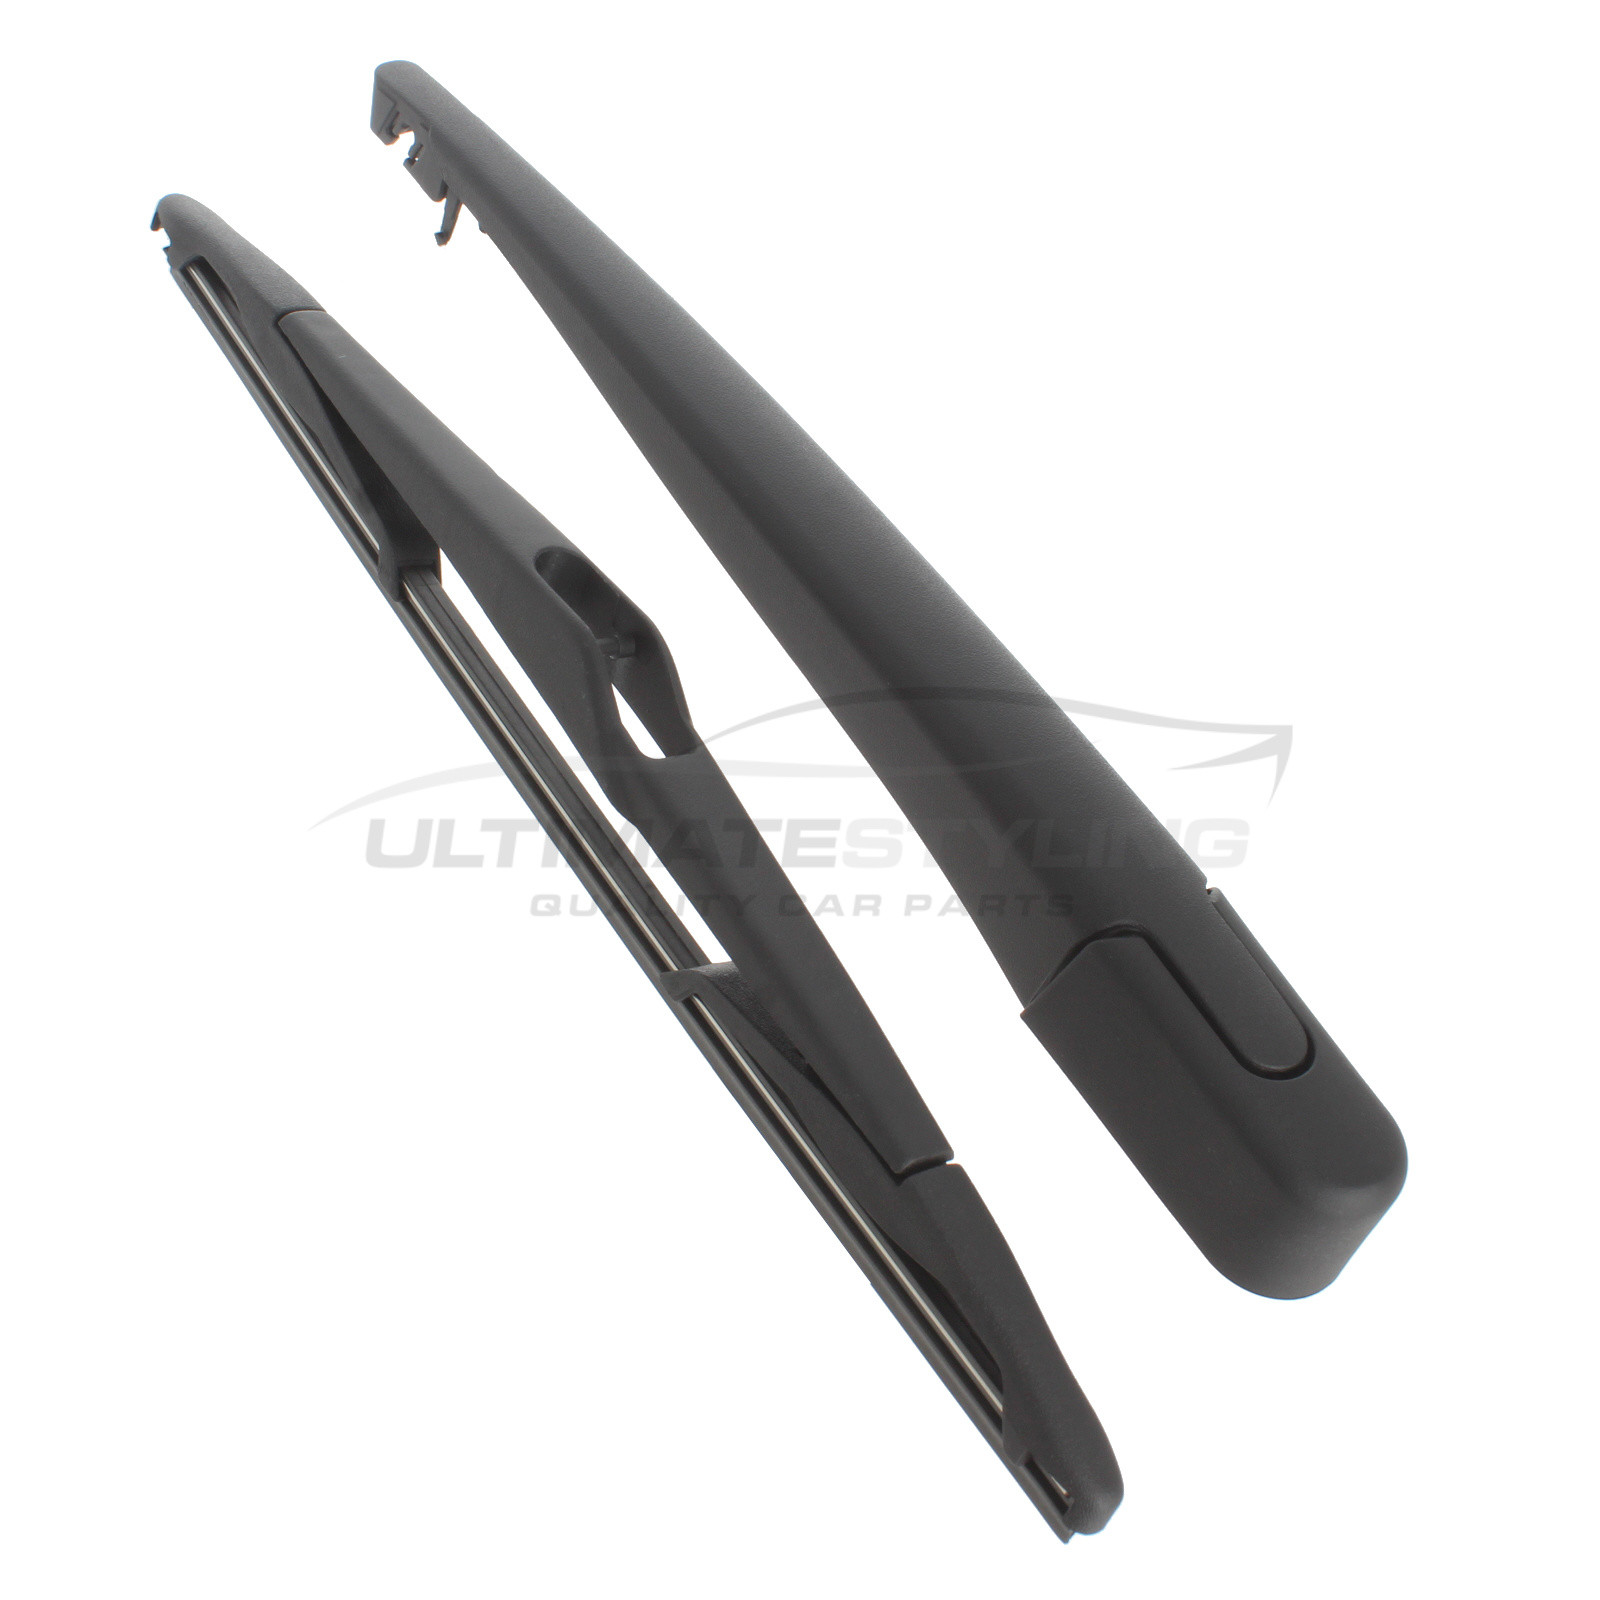 Rear Wiper Arm & Blade Set for Renault Twingo